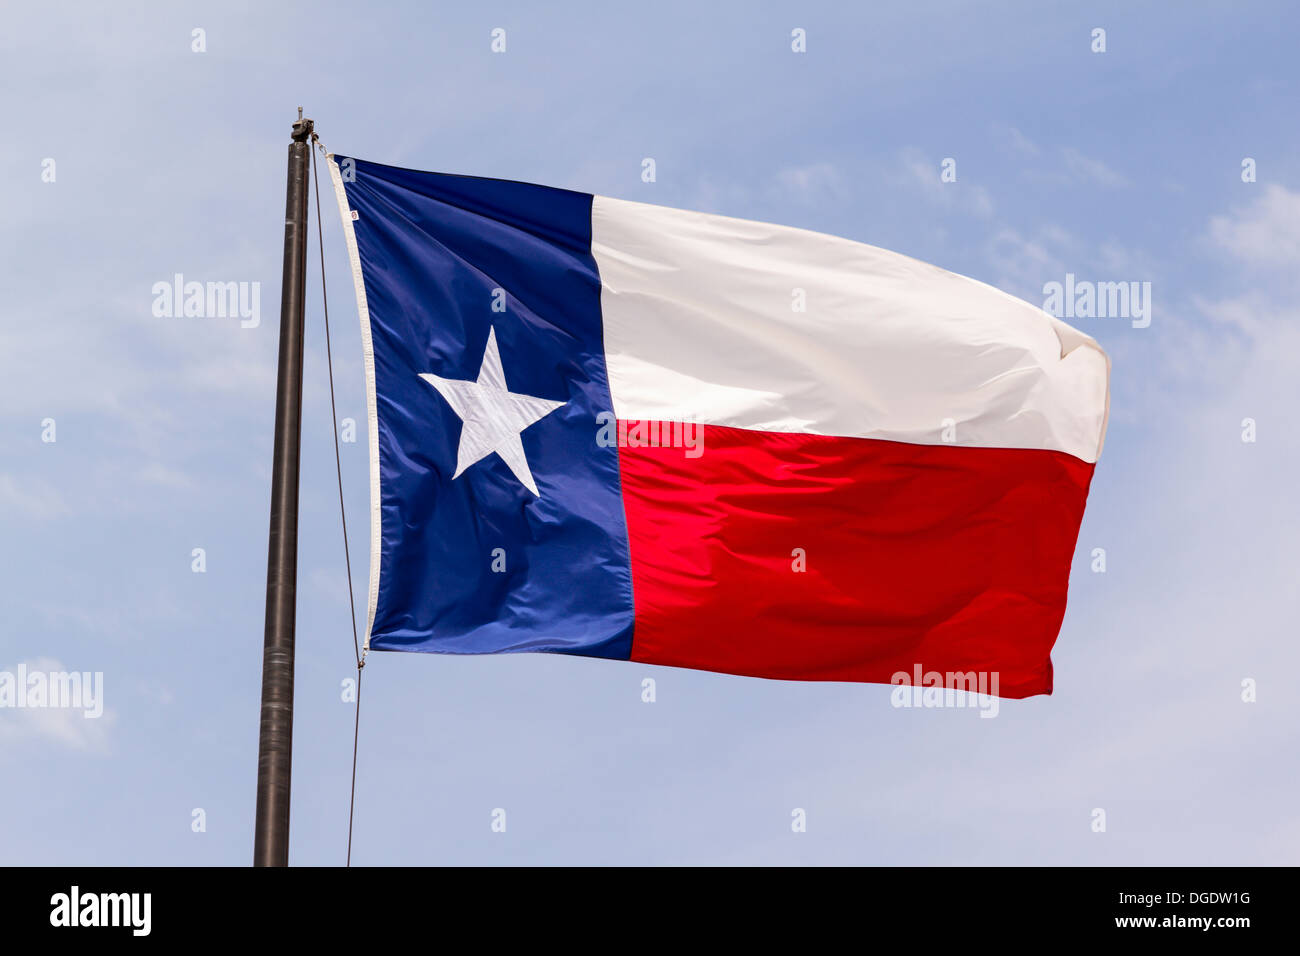 Texas flag blowing in the wind Stock Photo